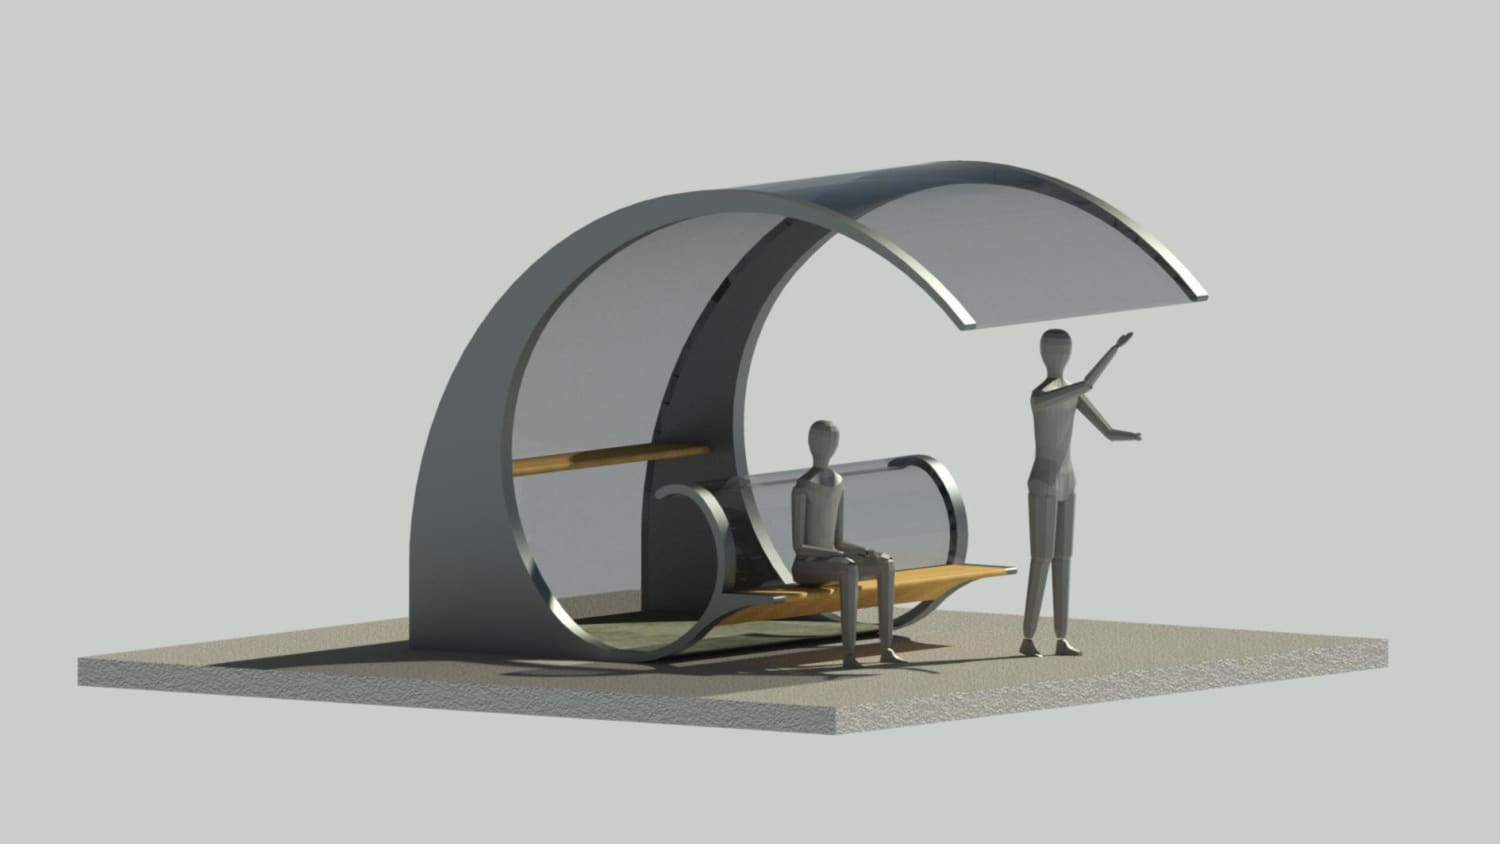 I made this bus stop 3D model based on Fibonacci’s Golden Spiral. There’s a bench on the front, and on the back, an area to plug-in your phone/laptop, and a shelf to work while standing. What do y’all think?